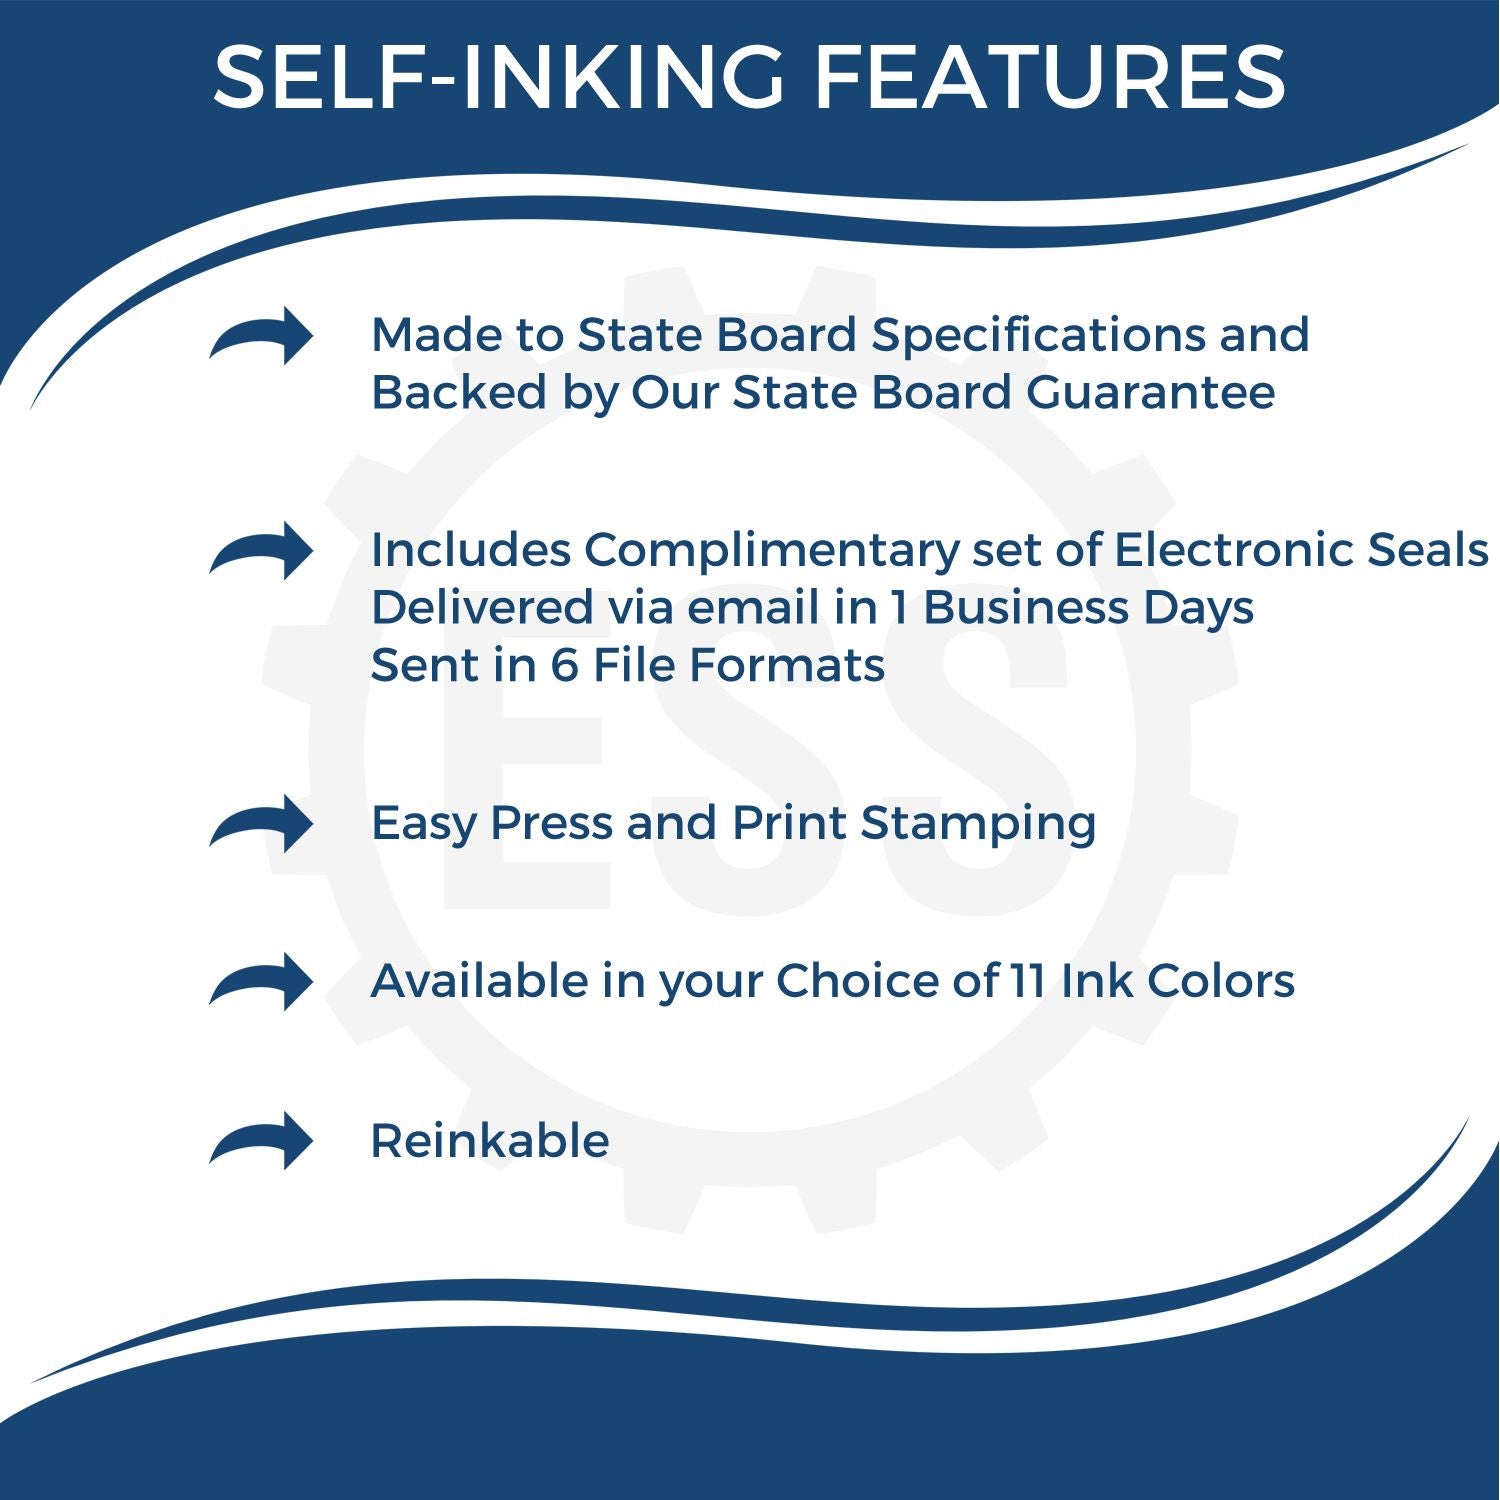 A picture of an infographic highlighting the selling points for the Self-Inking Delaware Landscape Architect Stamp